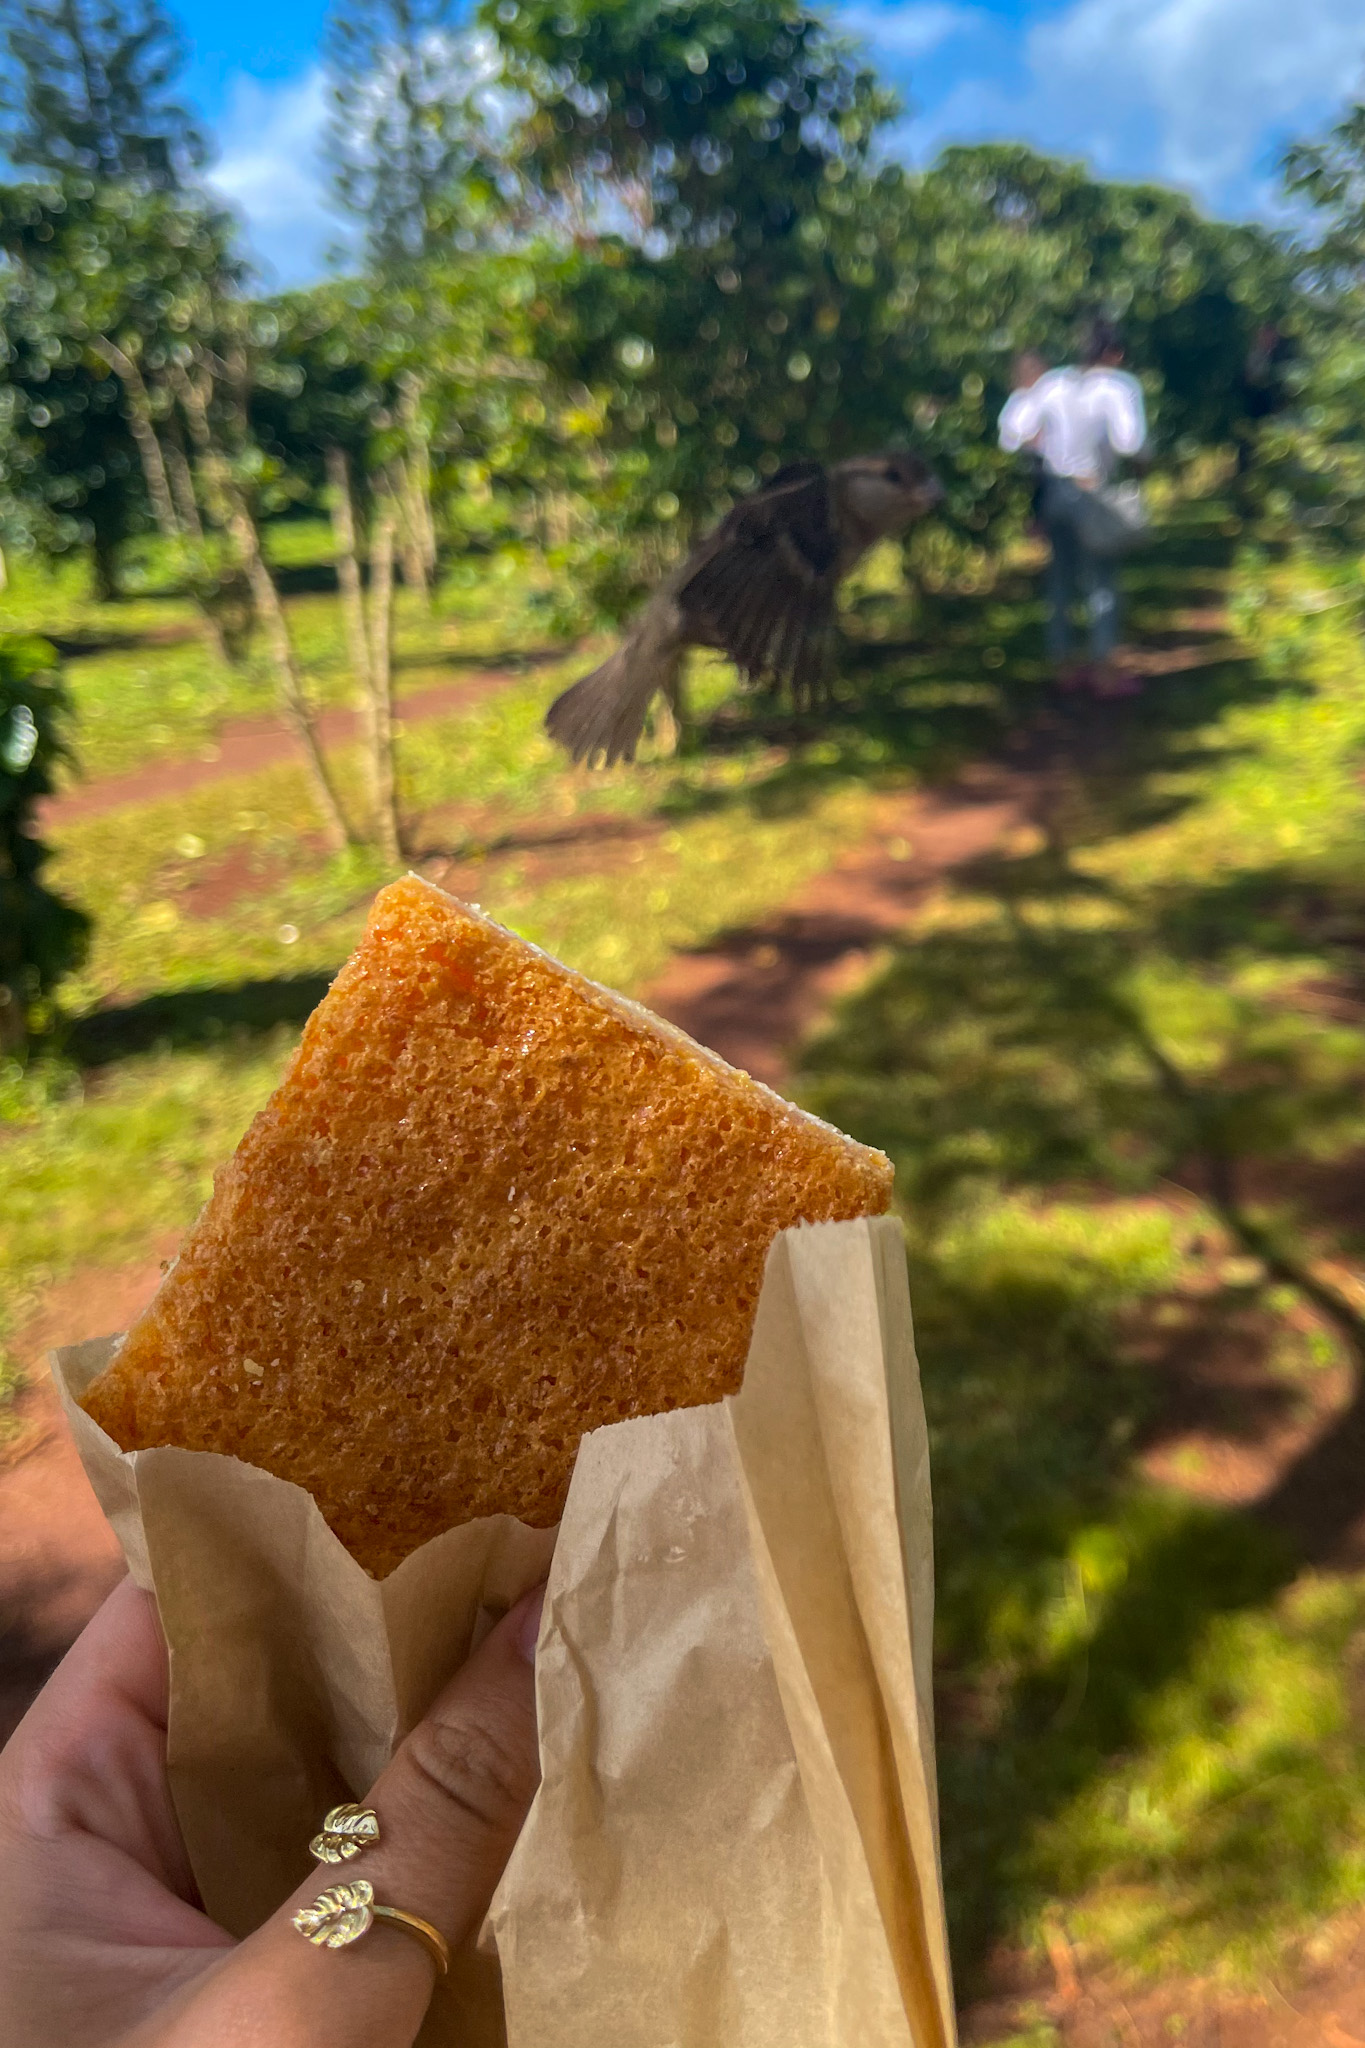 Lilikoi (passion fruit) bar pastry from Green World Farms North Shore, Oahu, Hawaii with bird flying in background on coffee farm